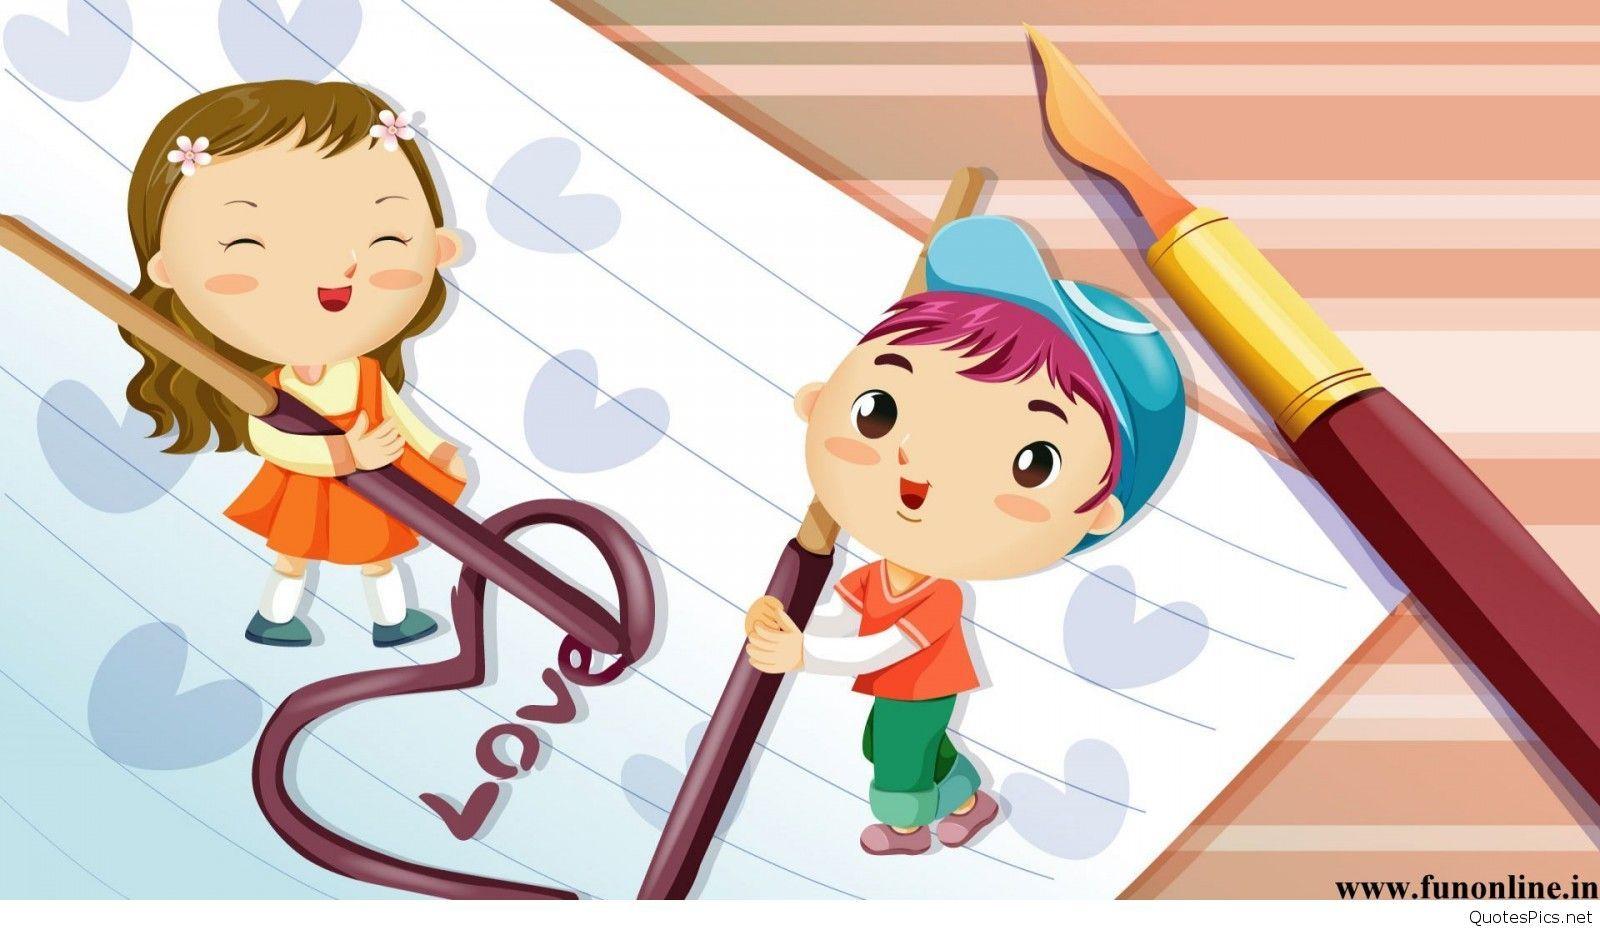 Love animated couple wallpaper cartoons HDD Wallpaper